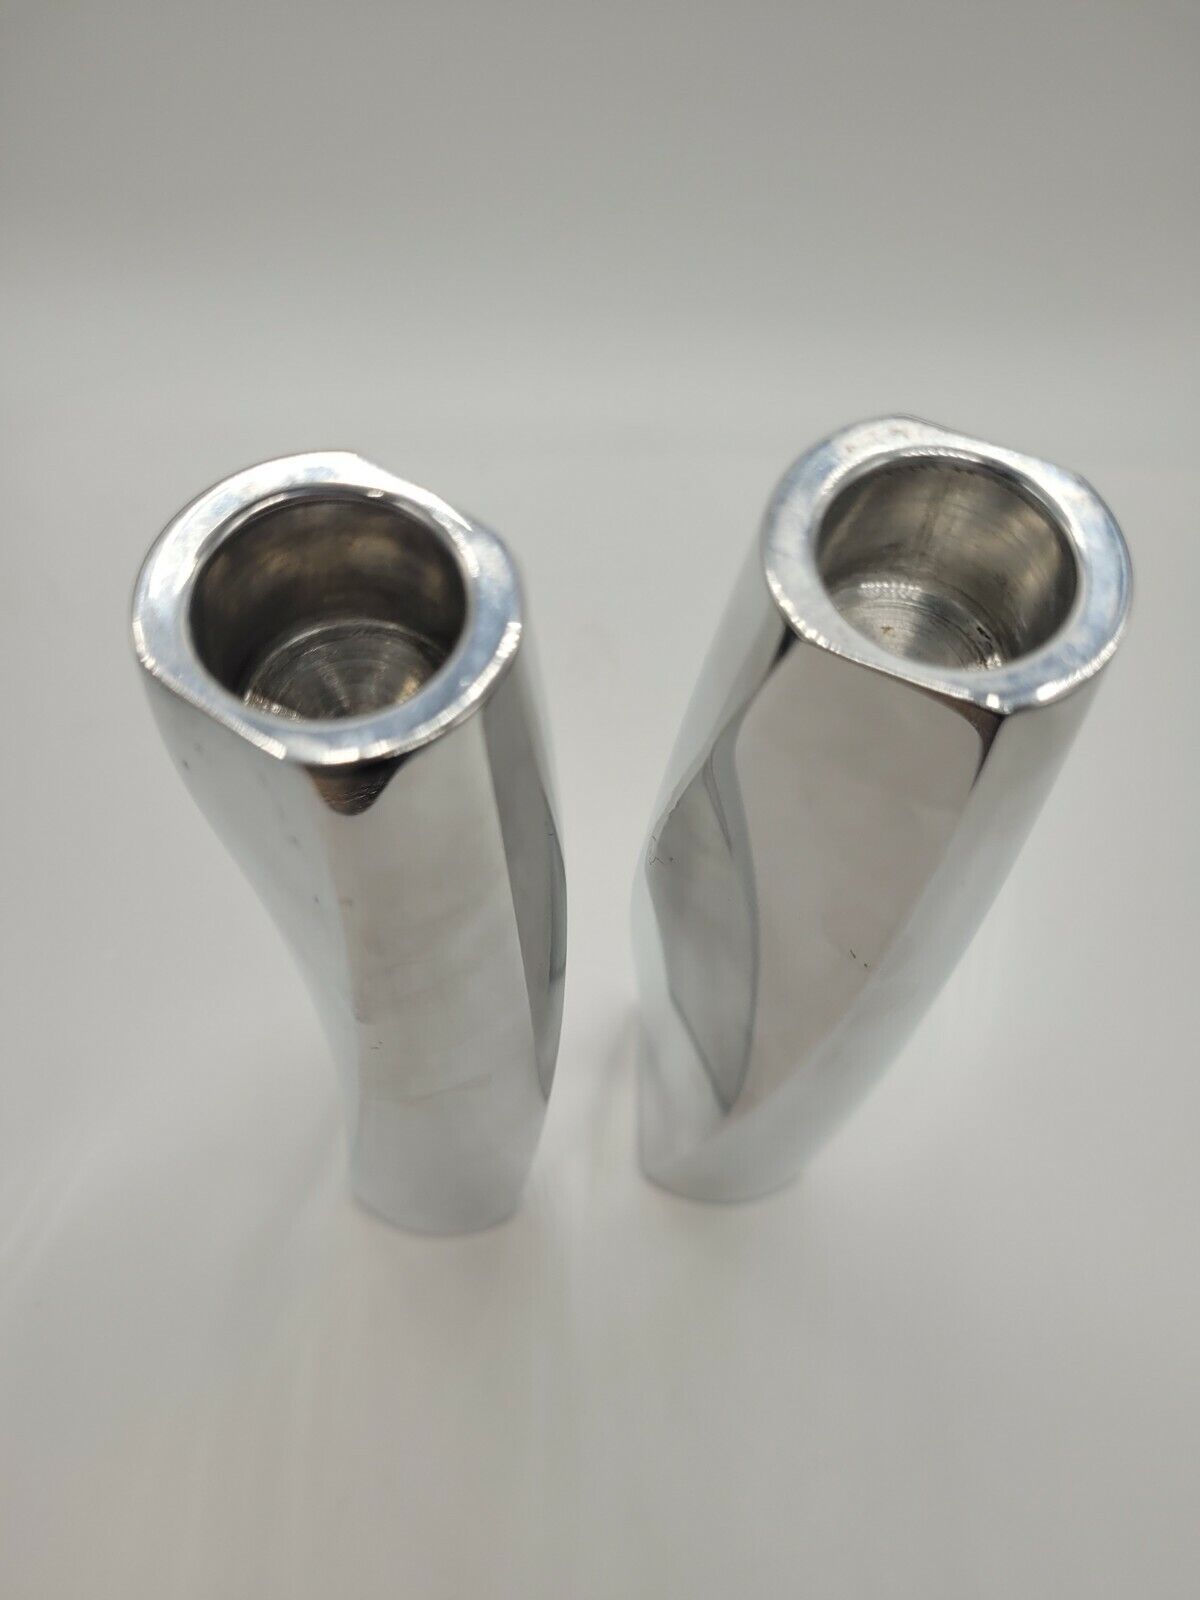 NAMBE Pair Twist Fred Bould 6236 Silver Candlesticks Holders 7” 2002 Pair Nambé NAMBE Twist Fred Bould 6236 - фотография #5